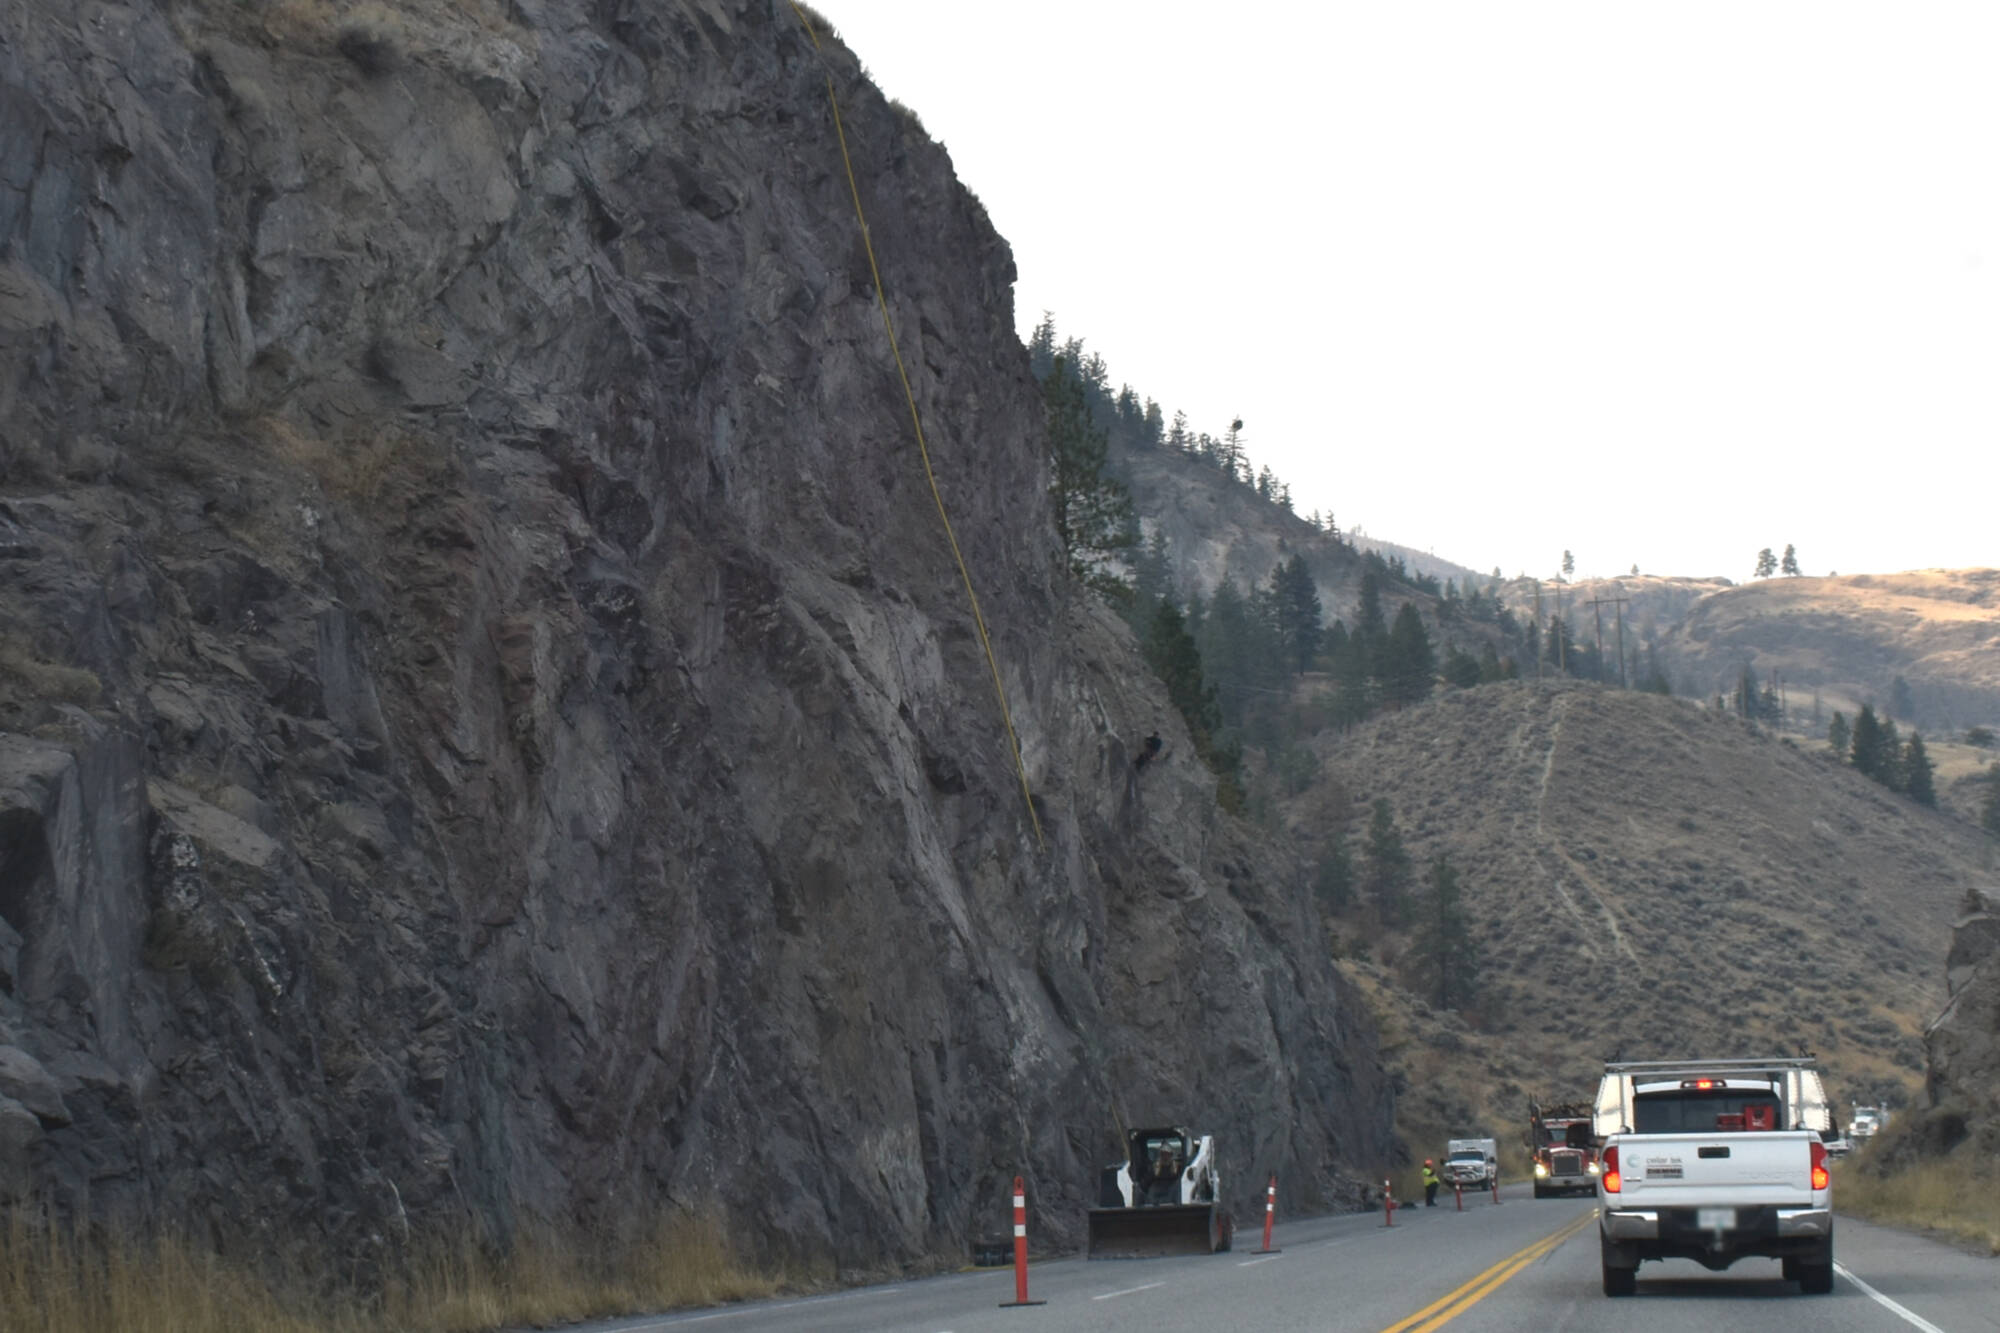 A worker scales the clifface while another in a skid-steer removes fallen rock from a section under work on Highway 97 between Kaleden and Penticton. (Brennan Phillips - Western News)